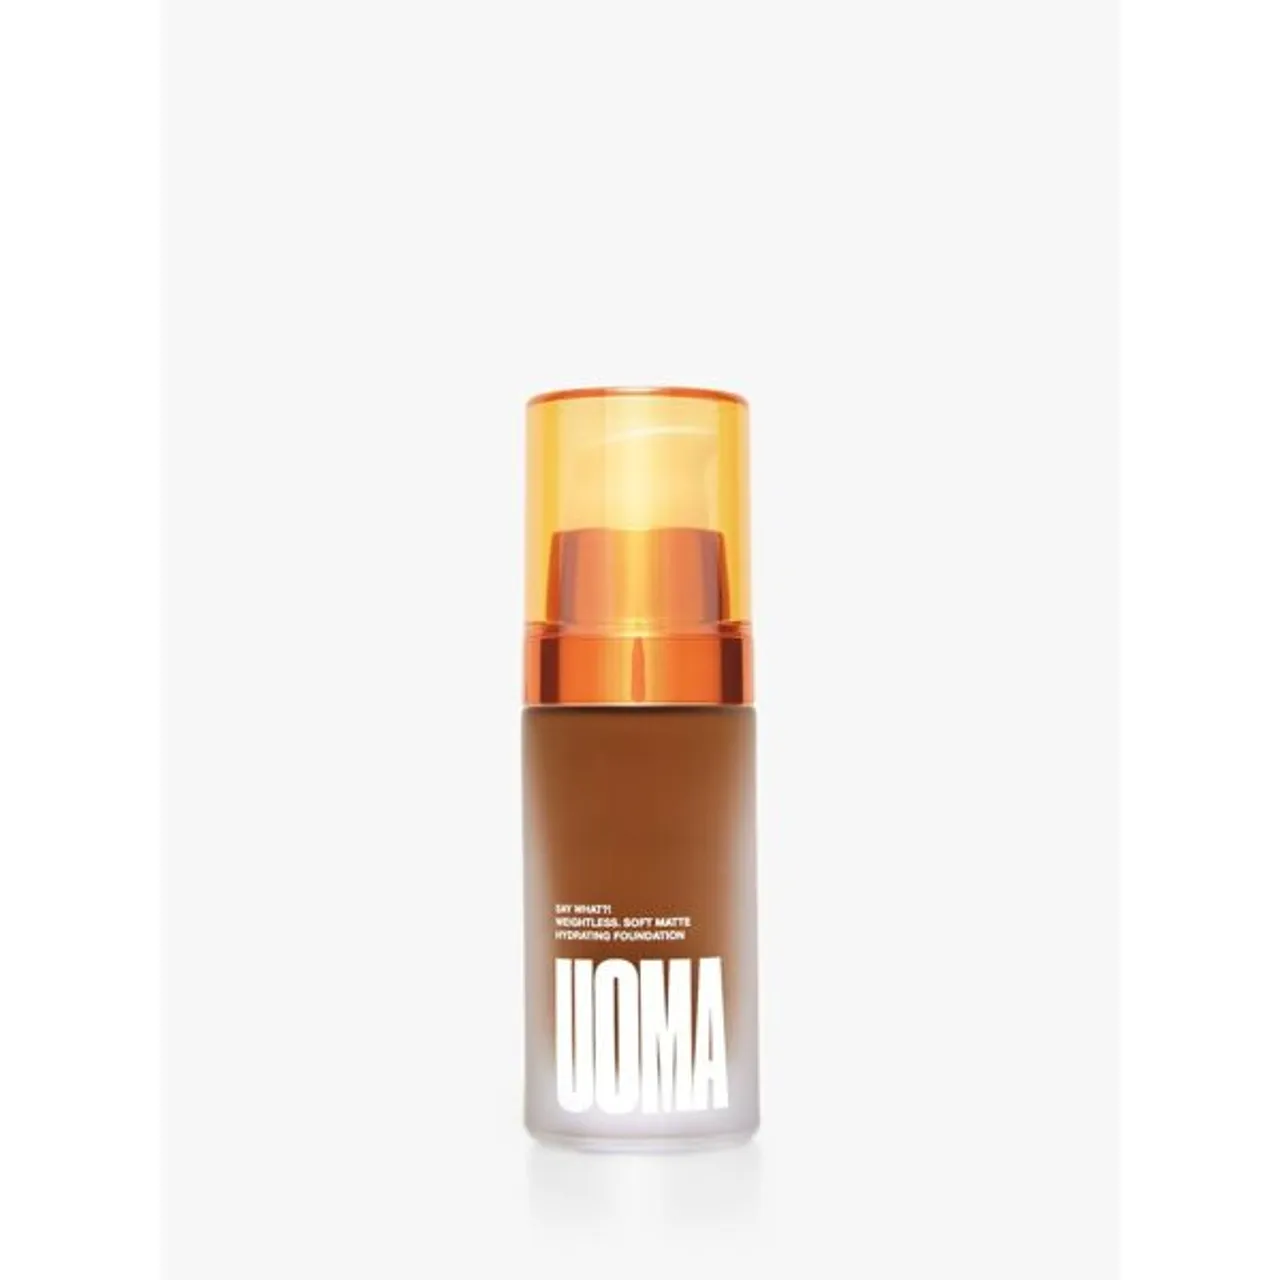 UOMA Beauty Say What?! Foundation - Brown Sugar T2C - Unisex - Size: 30ml